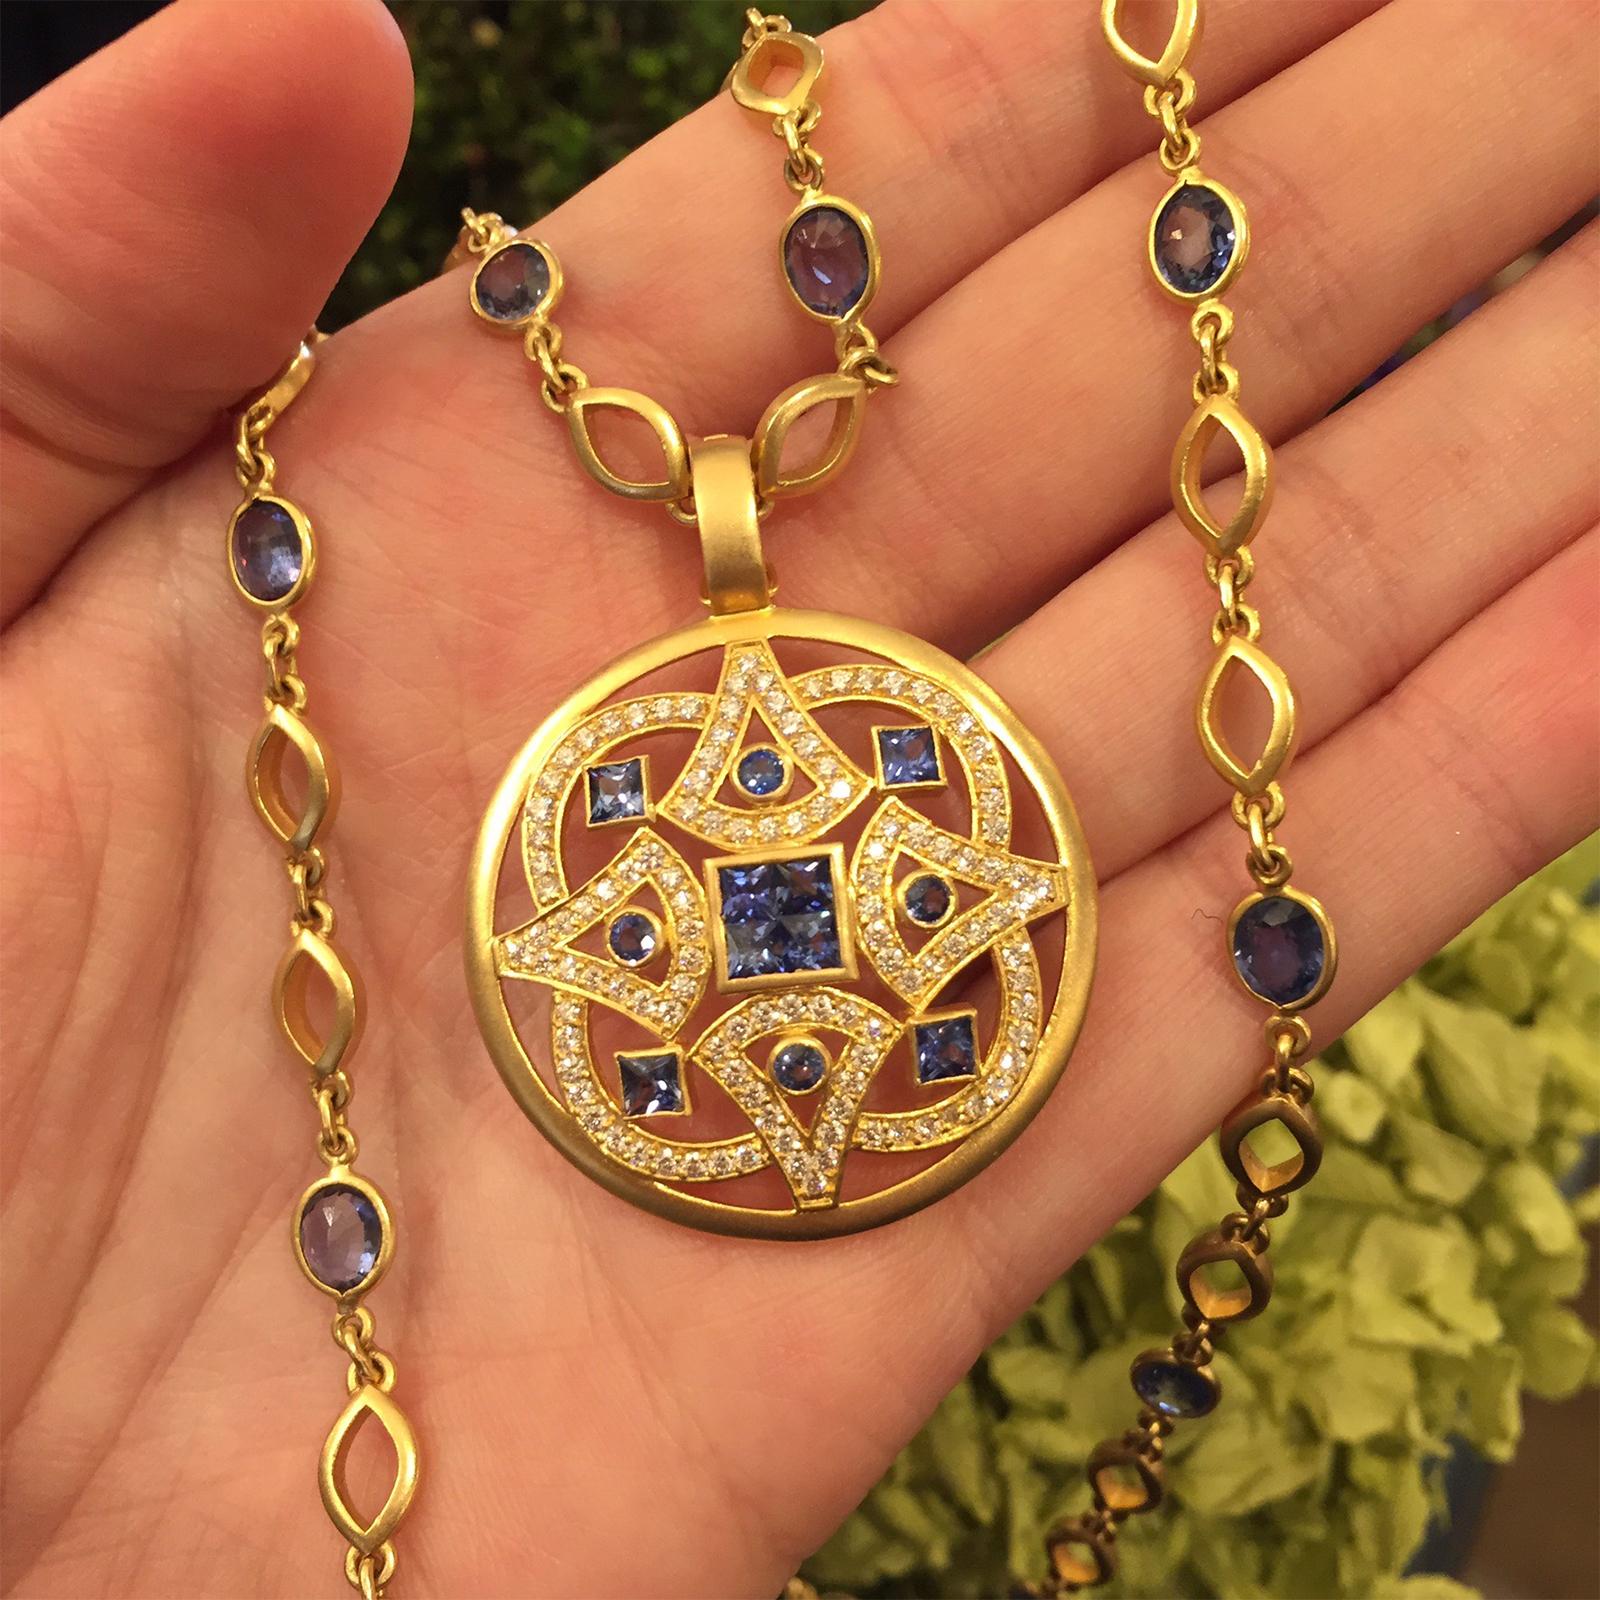 The Mandala is an ancient symbol which represents the circle of life.  Nancy offers several different versions of the Mandala, the one shown is set with 2cts. of Ceylon Blue Sapphires and 1.13cts Diamonds.
The pendant can be custom ordered in any